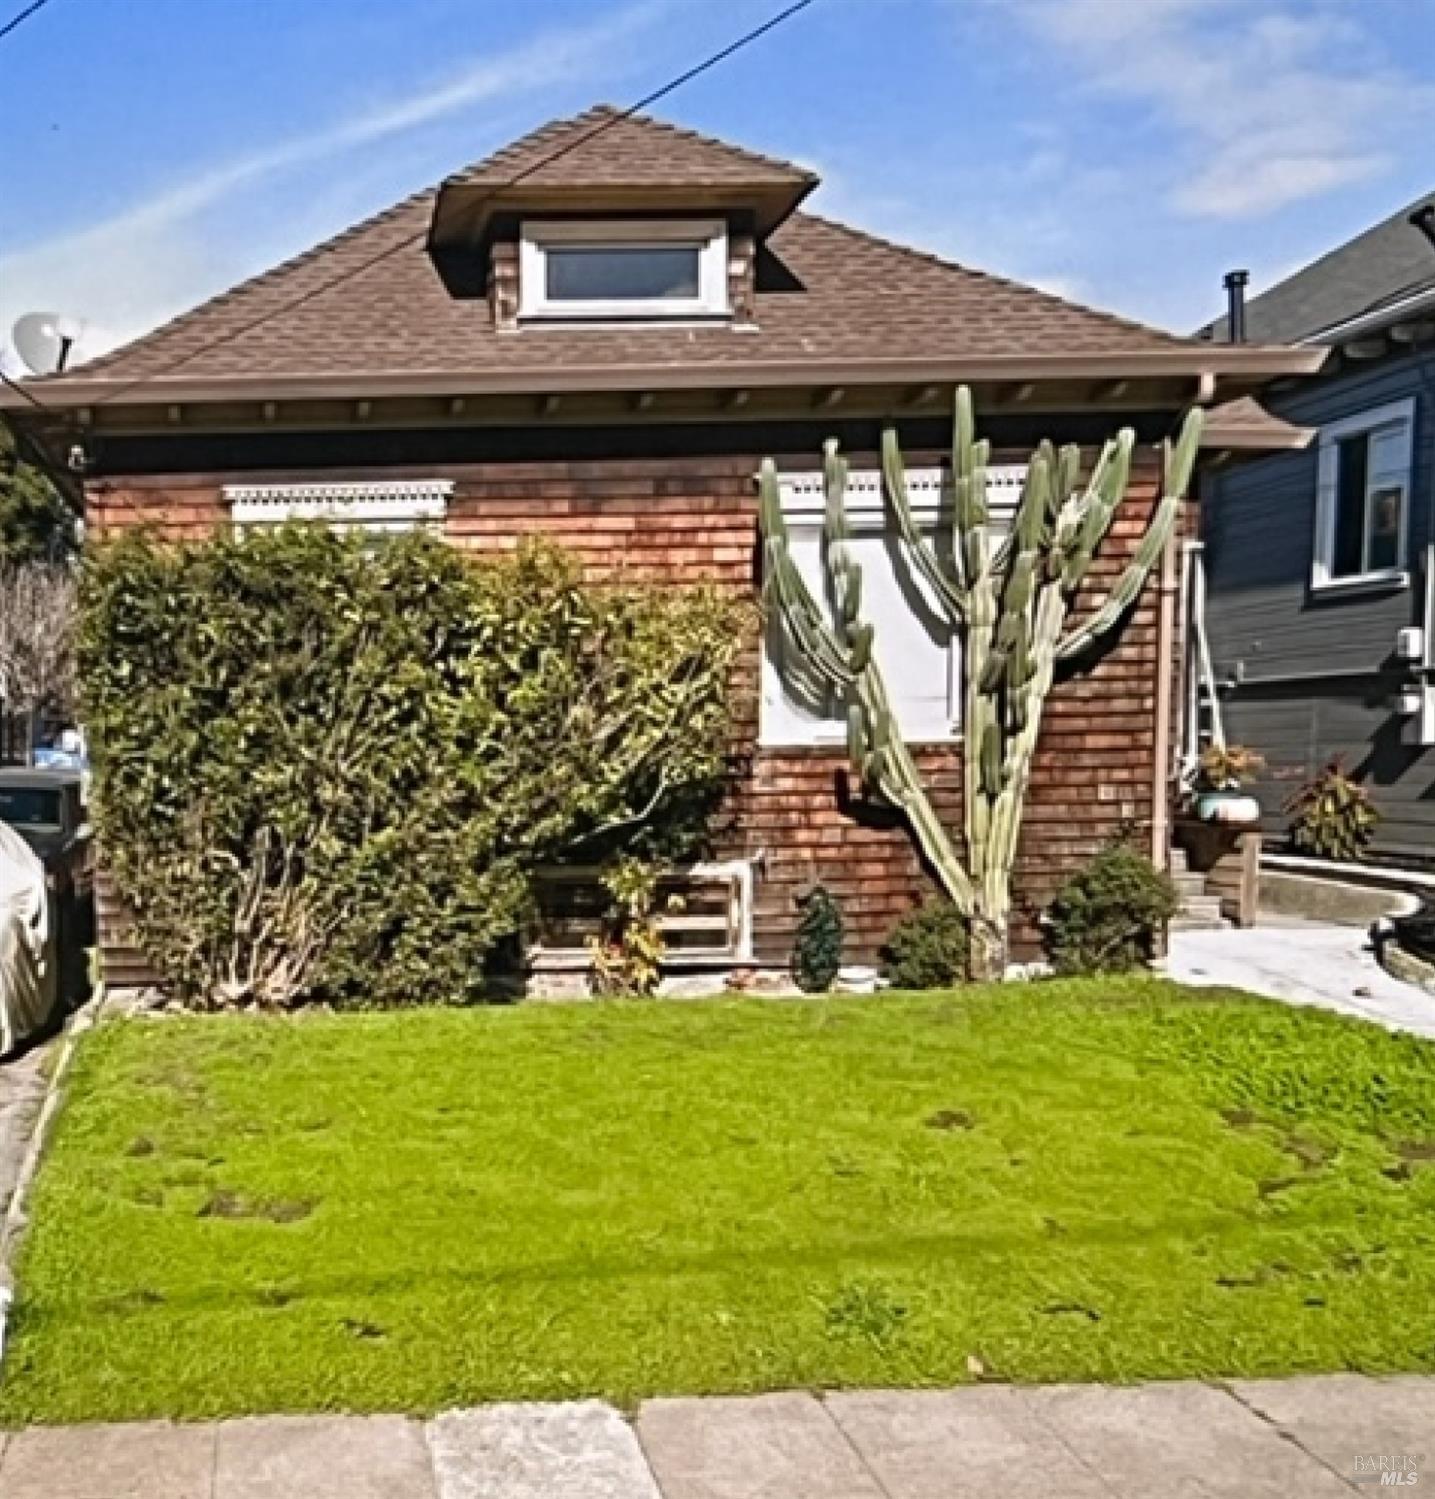 Photo of 812 54th St in Oakland, CA